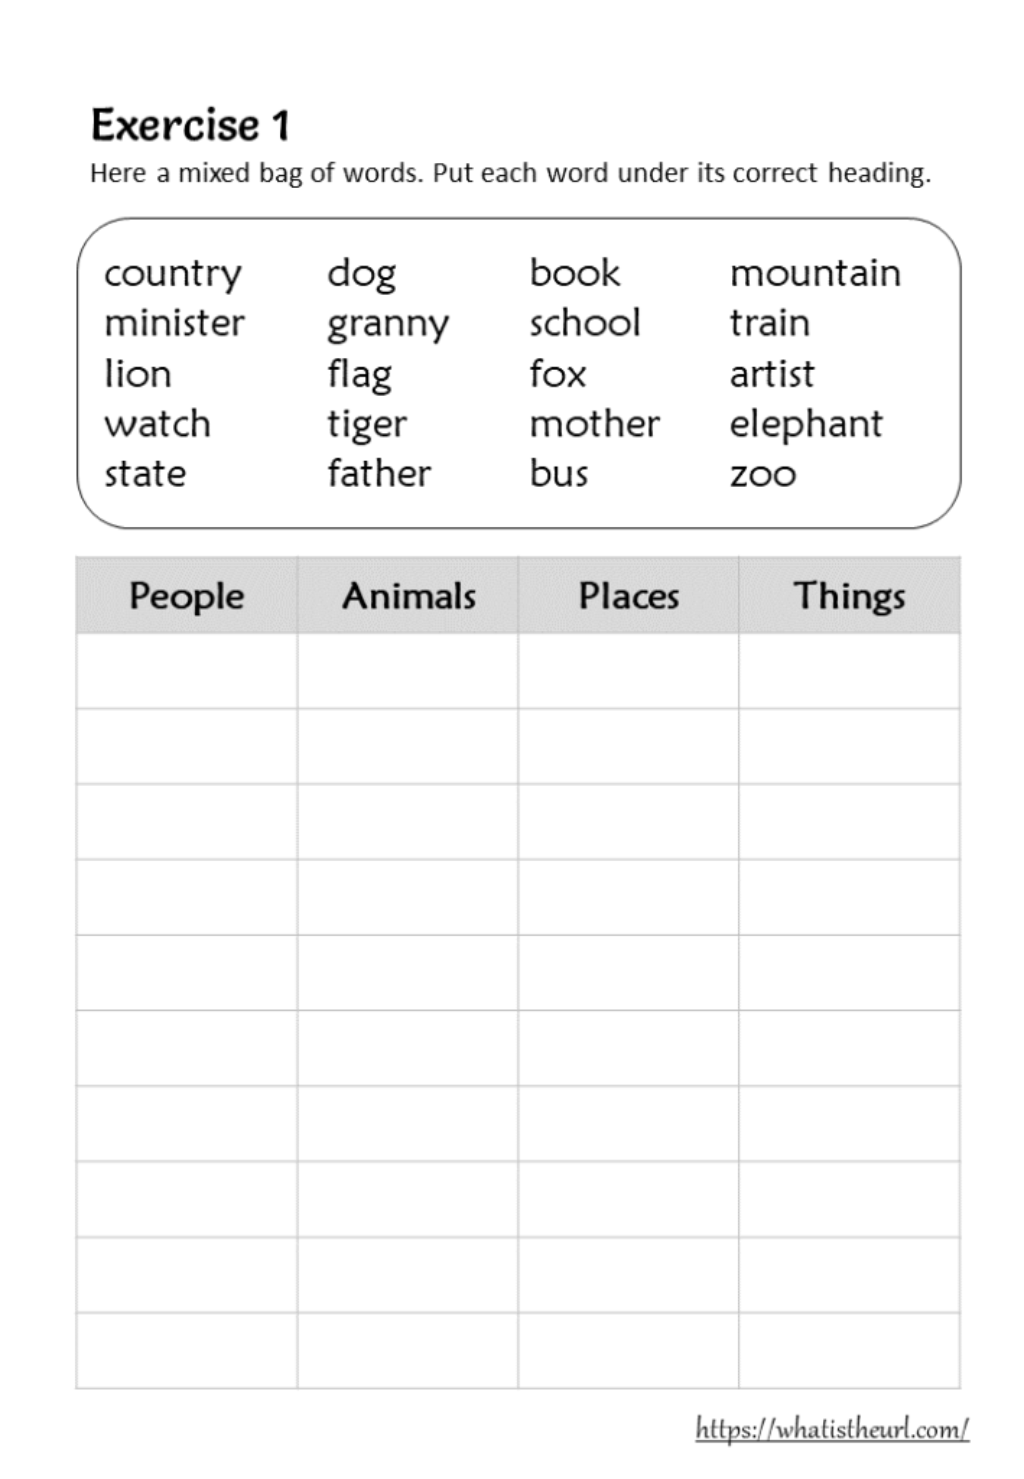 Worksheet On Types Of Nouns For Class 7